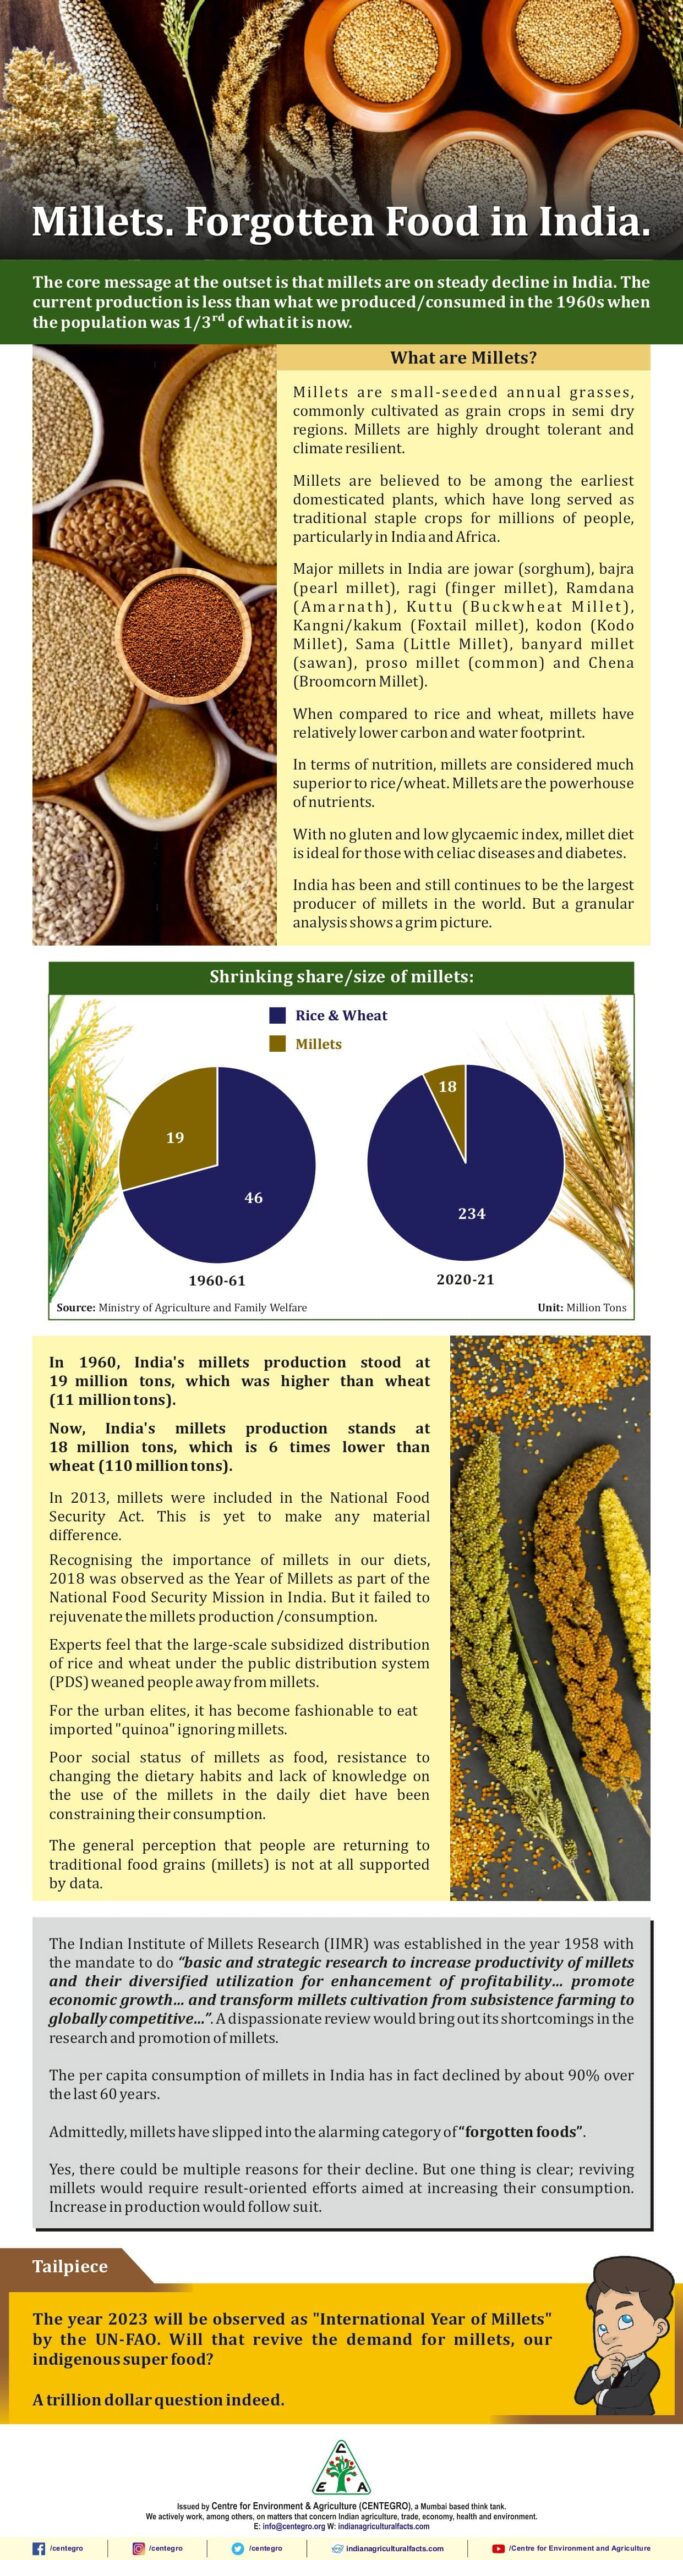 millets-forgotten-food-in-India-infographic